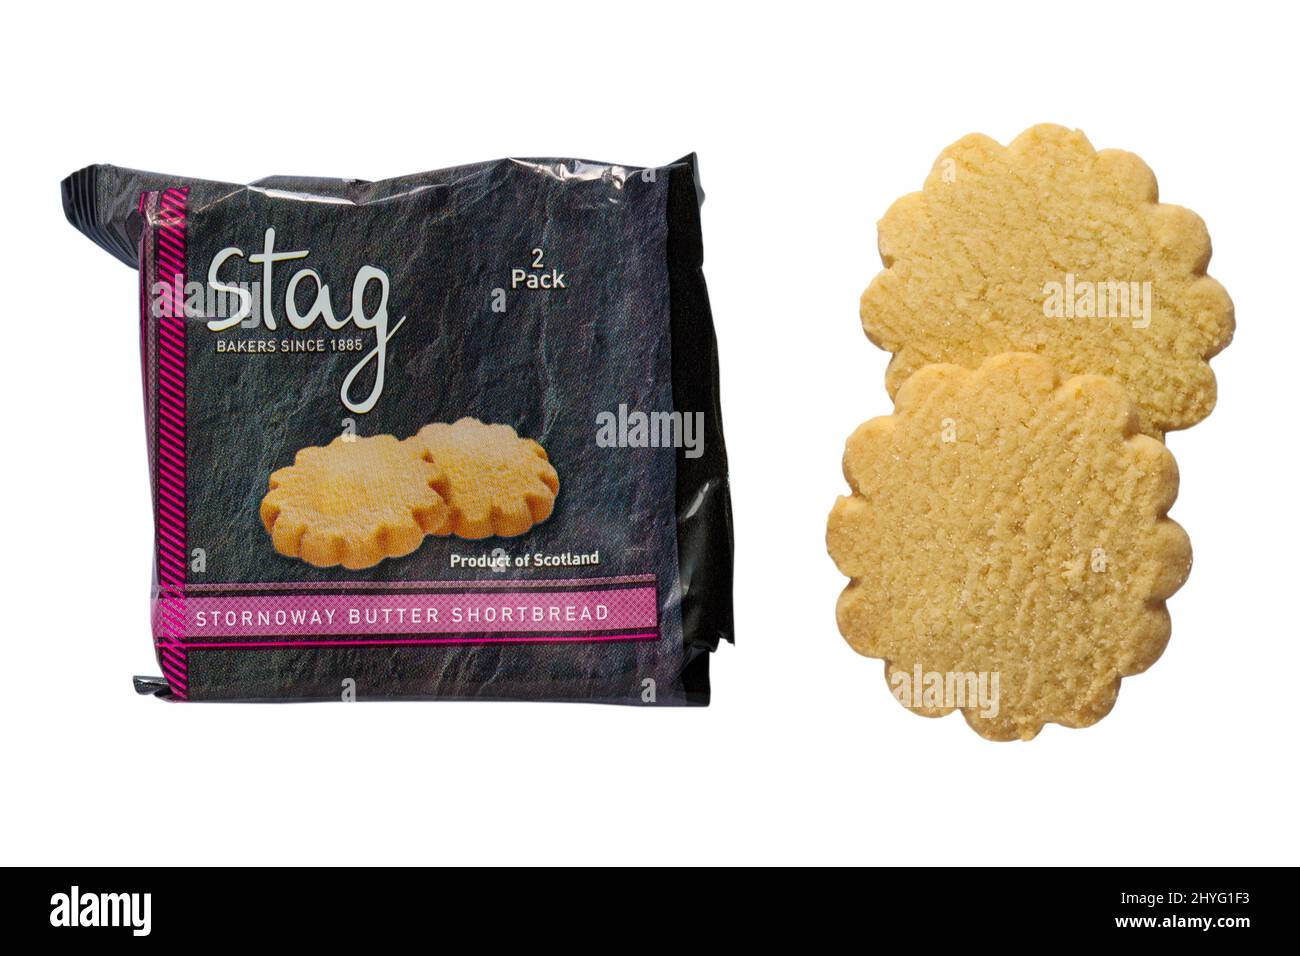 Packet of Stag Stornoway Butter Shortbread product of Scotland opened with contents removed isolated on white background Stock Photo